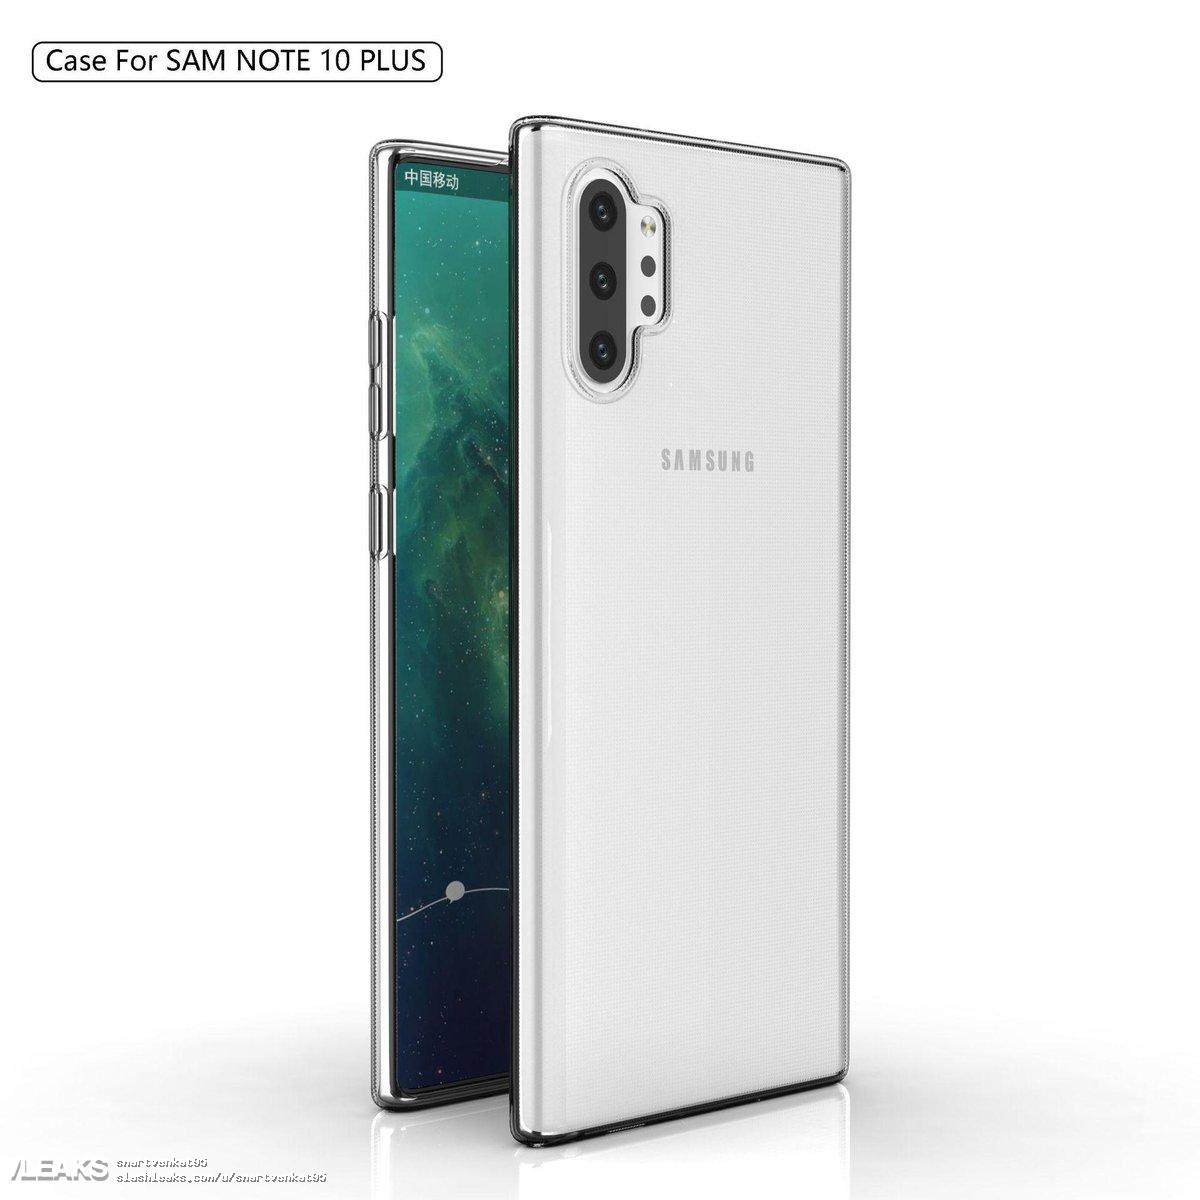 img SAMSUNG GALAXY NOTE 10 PLUS CASE MATCHES PREVIOUSLY LEAKED DESIGN